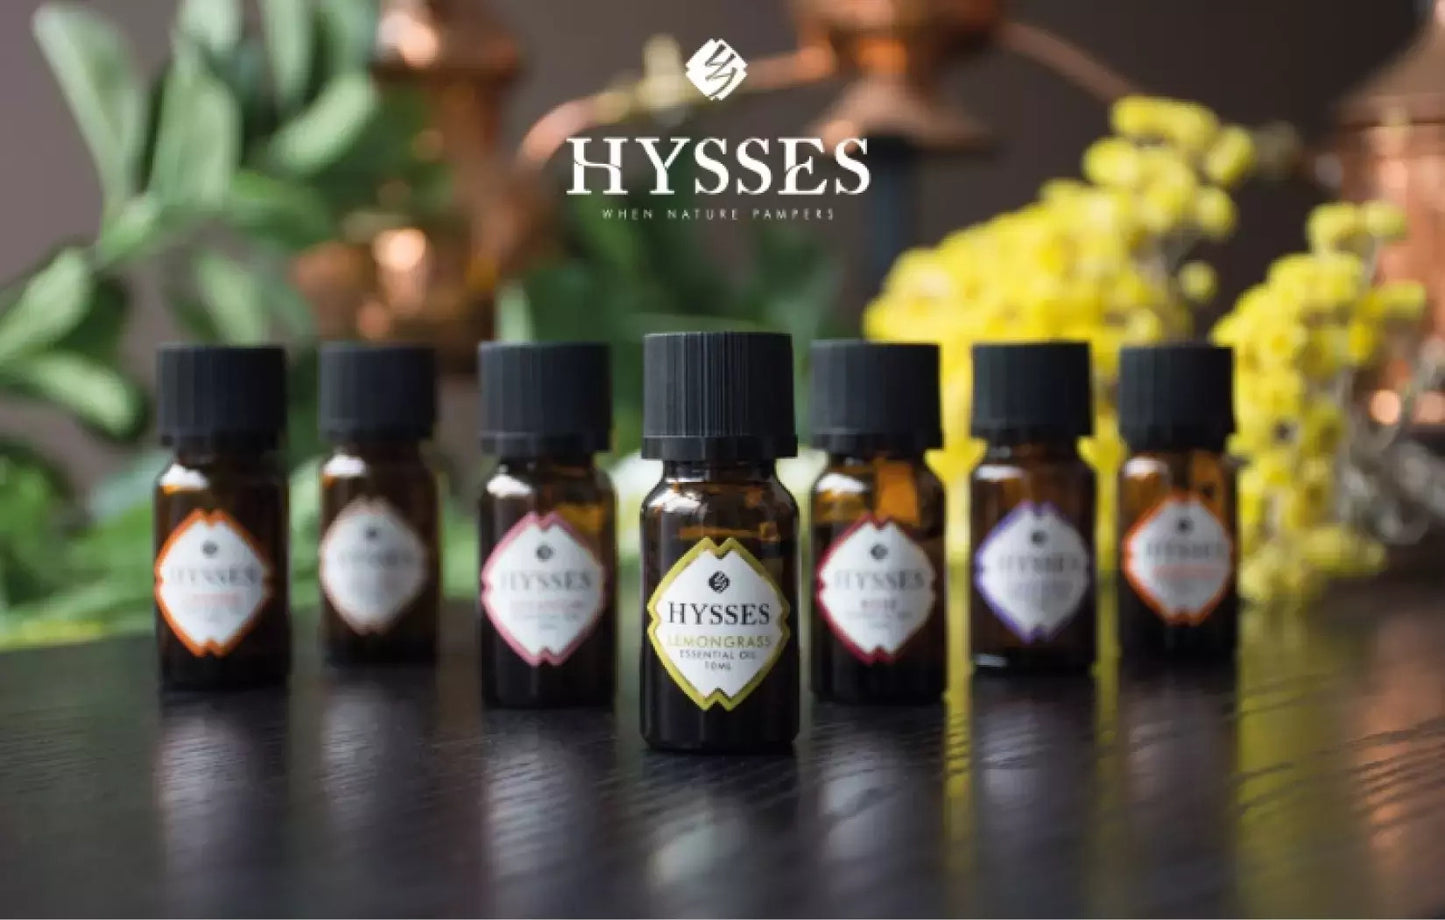 Hysses Essential Oils, Remedies Collection 10ml - Anxiety